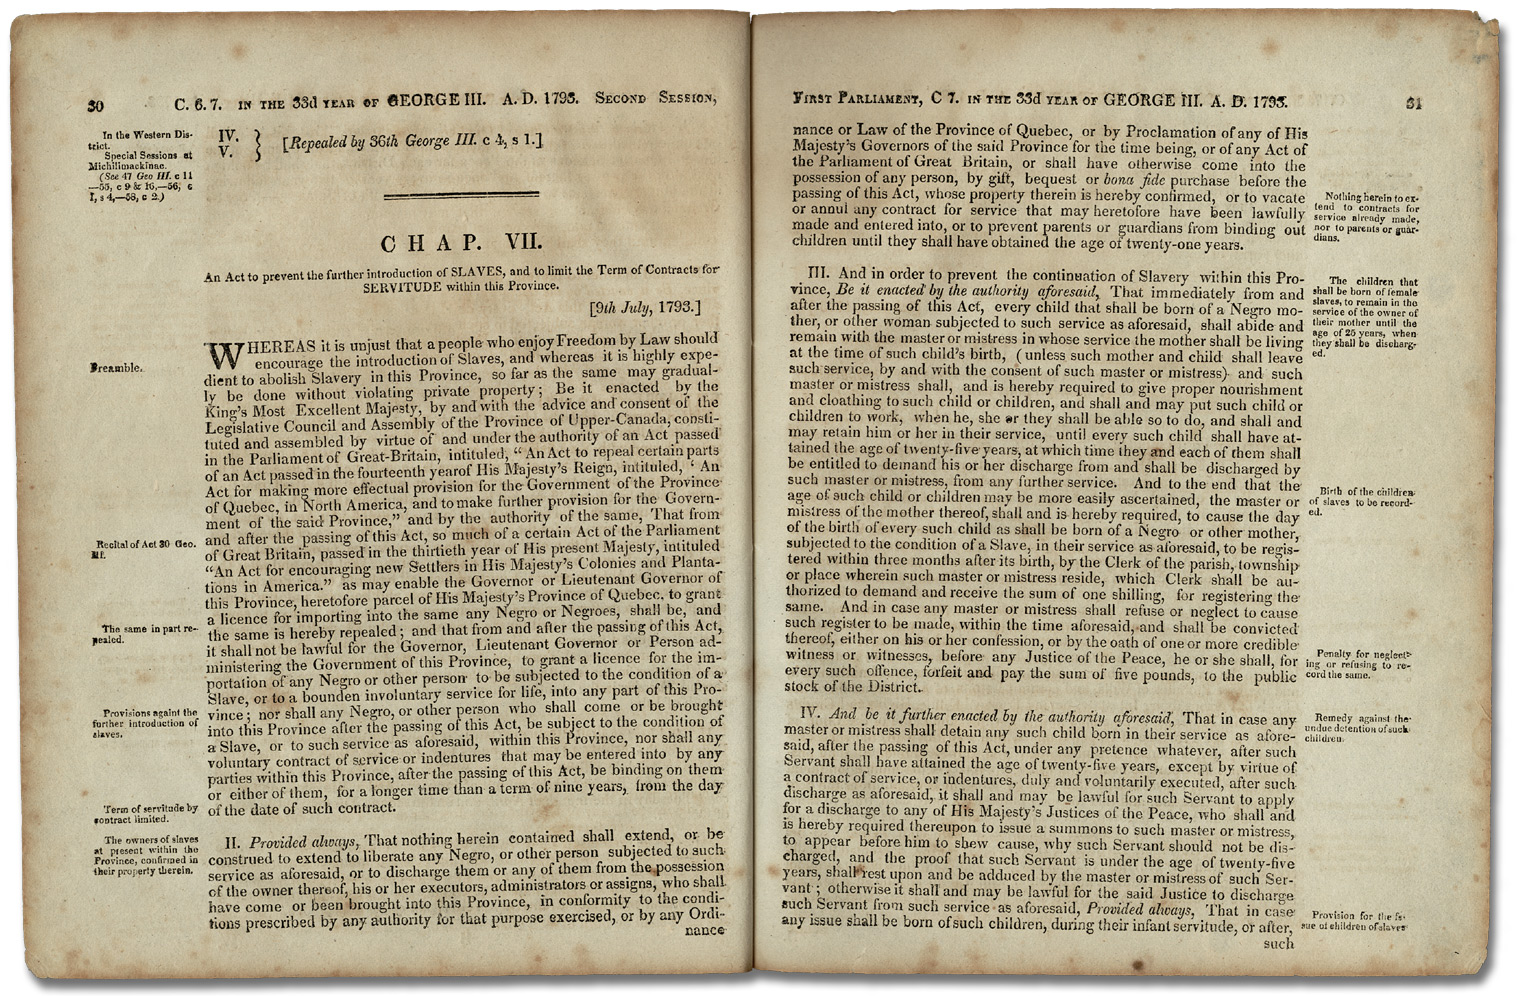 An Act to Prevent the further Introduction of Slaves and to limit the Term of Contracts for Servitude Statutes of Upper Canada Cap. 7, 33 George III, 1793